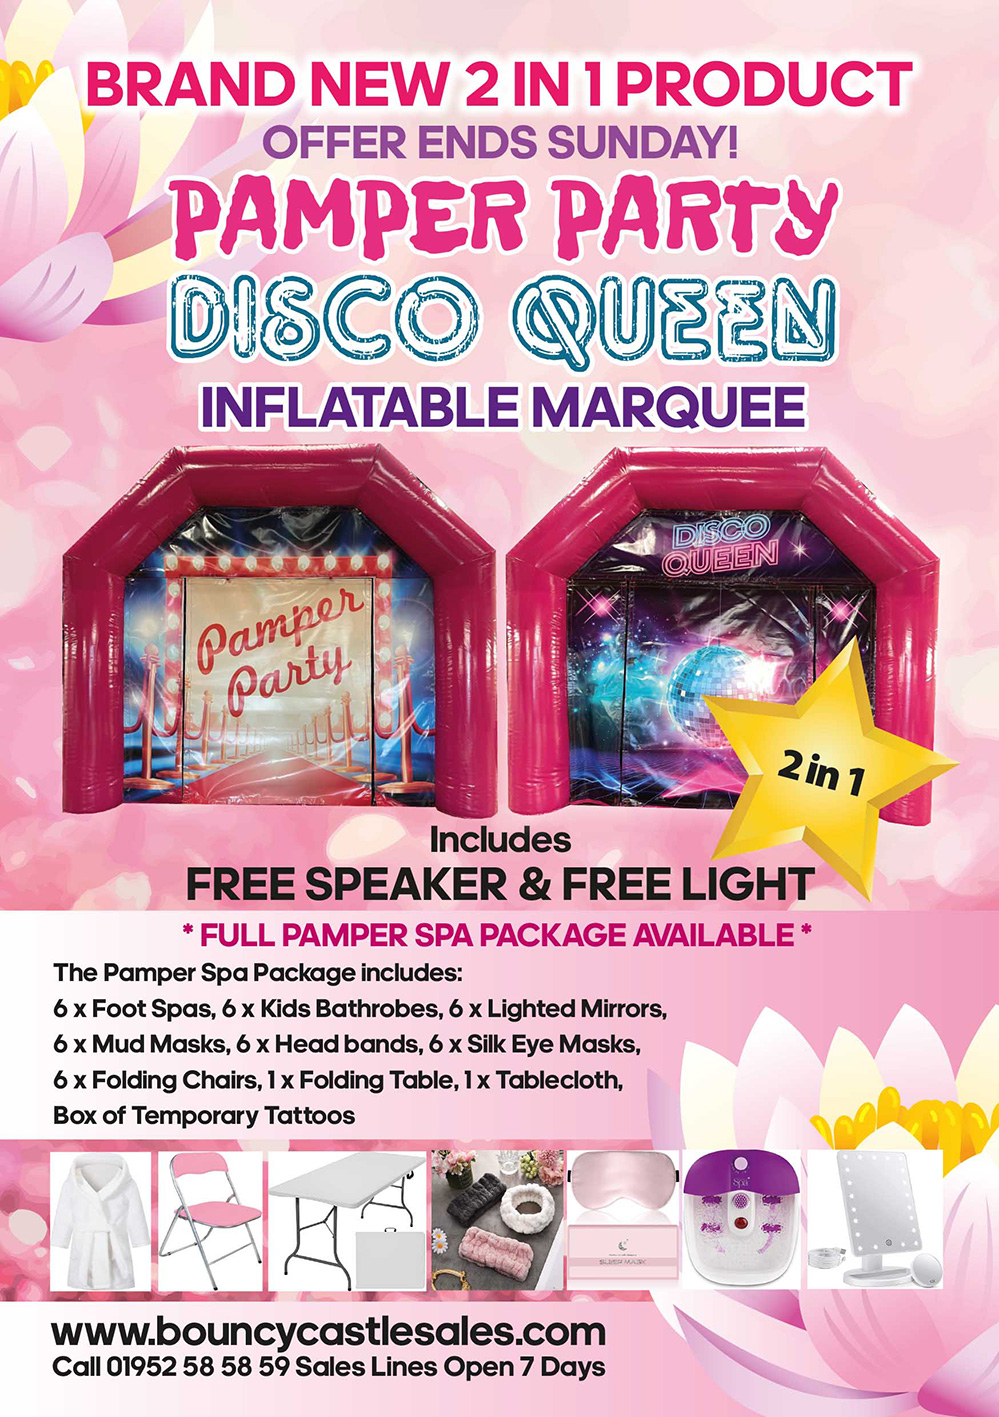 Pamper Party package